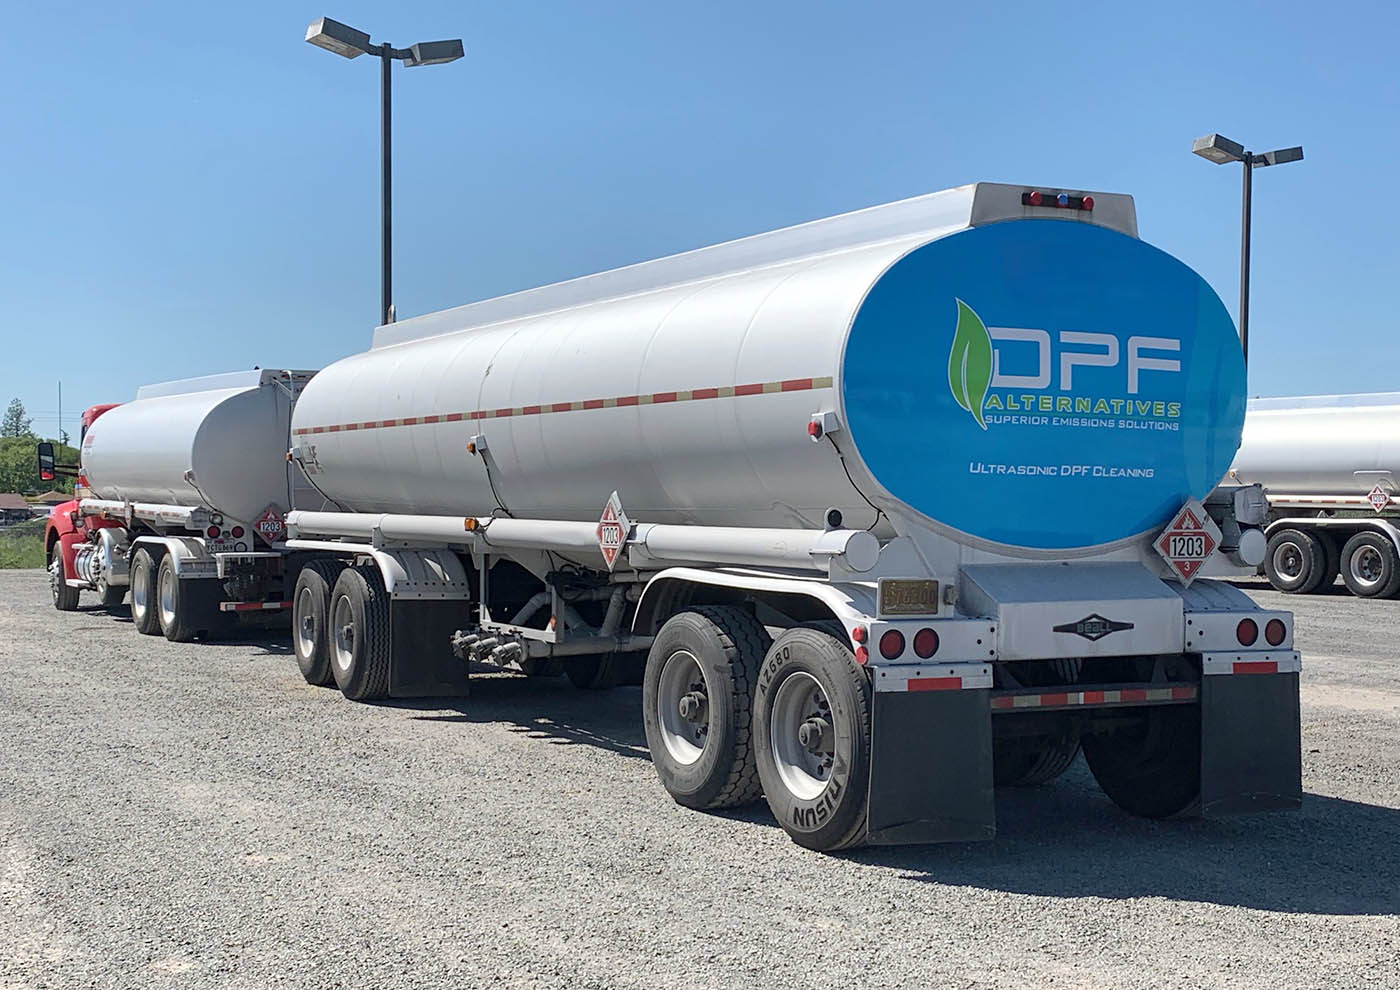 A DPF Alternatives truck - professional and reliable service.